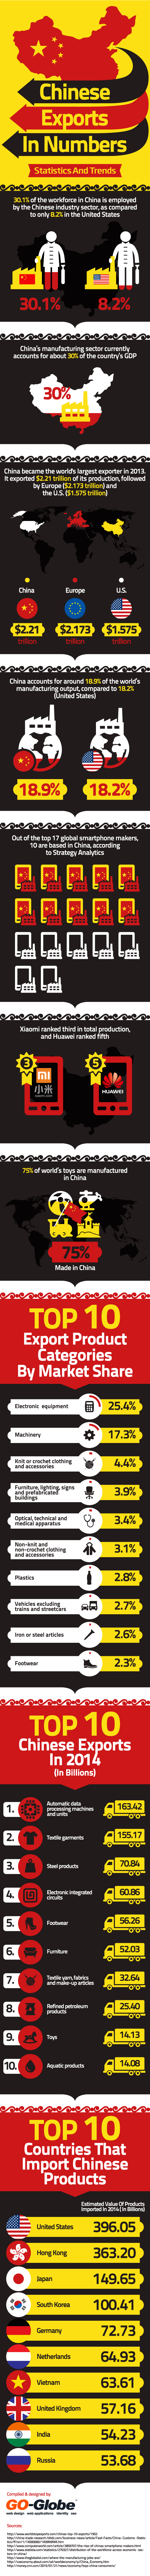 Chinese exports infographic in numbers